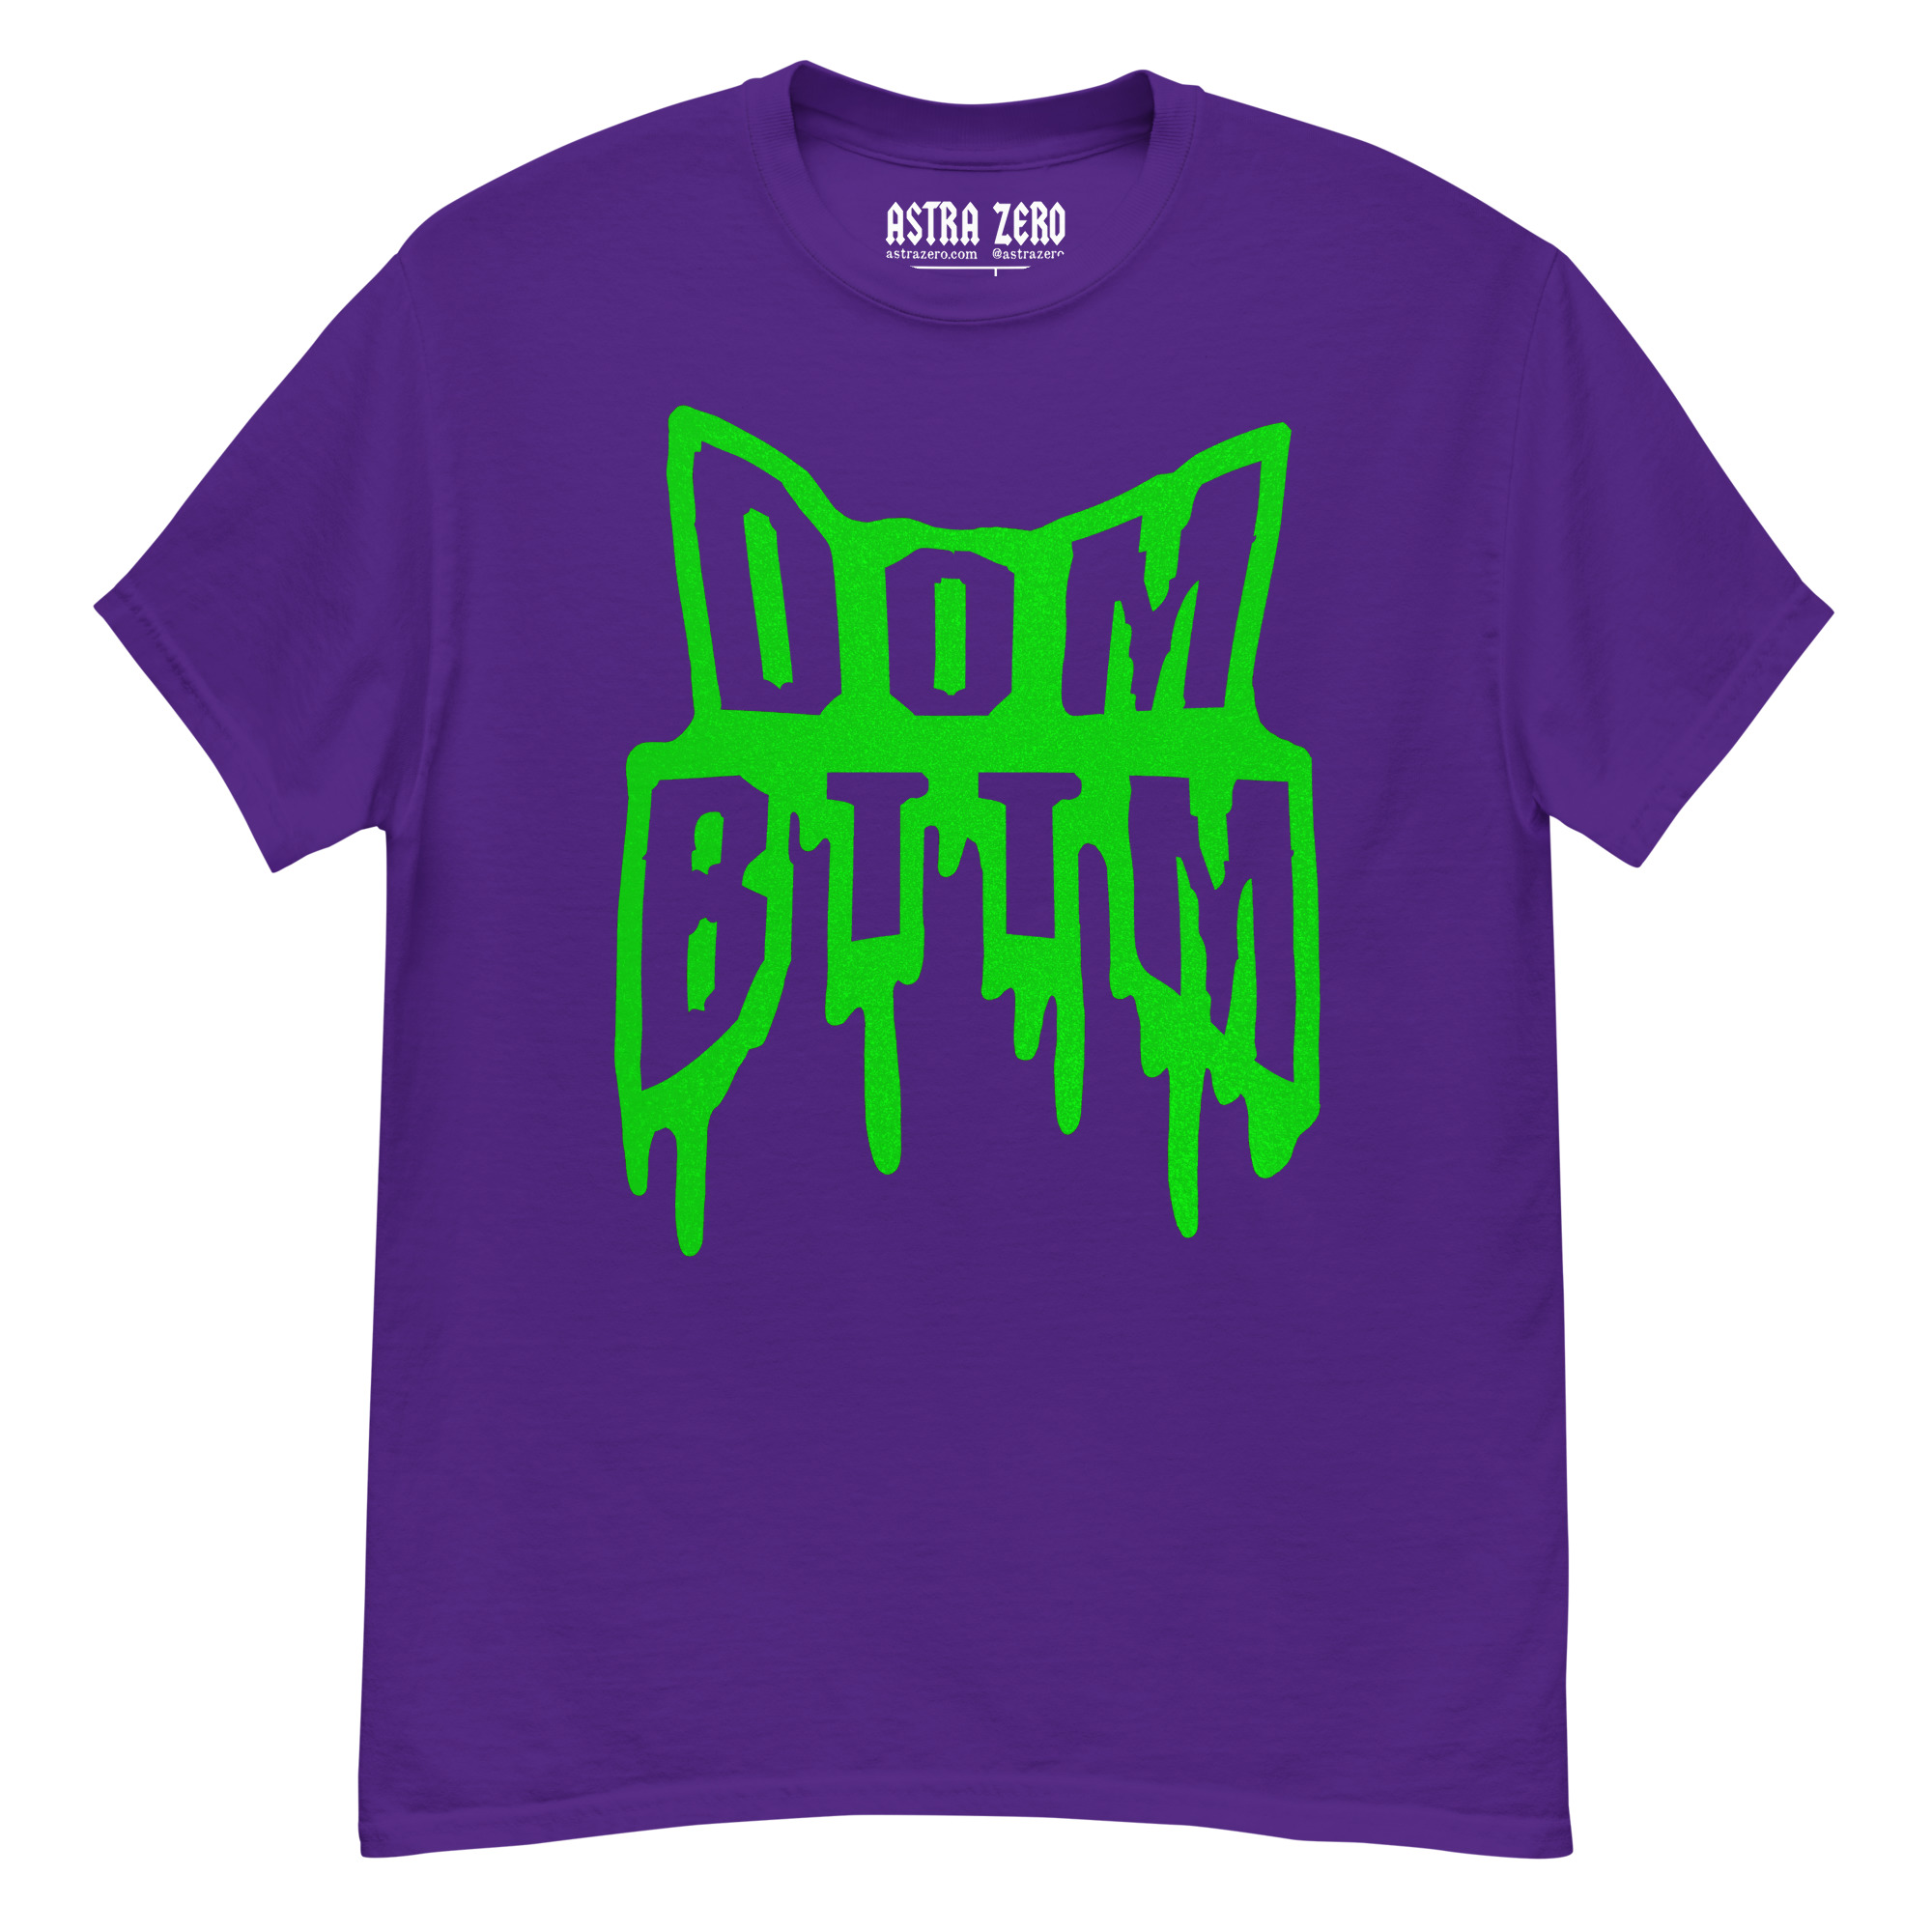 Featured image for “DOM BTTM SLIME - Men's classic tee”